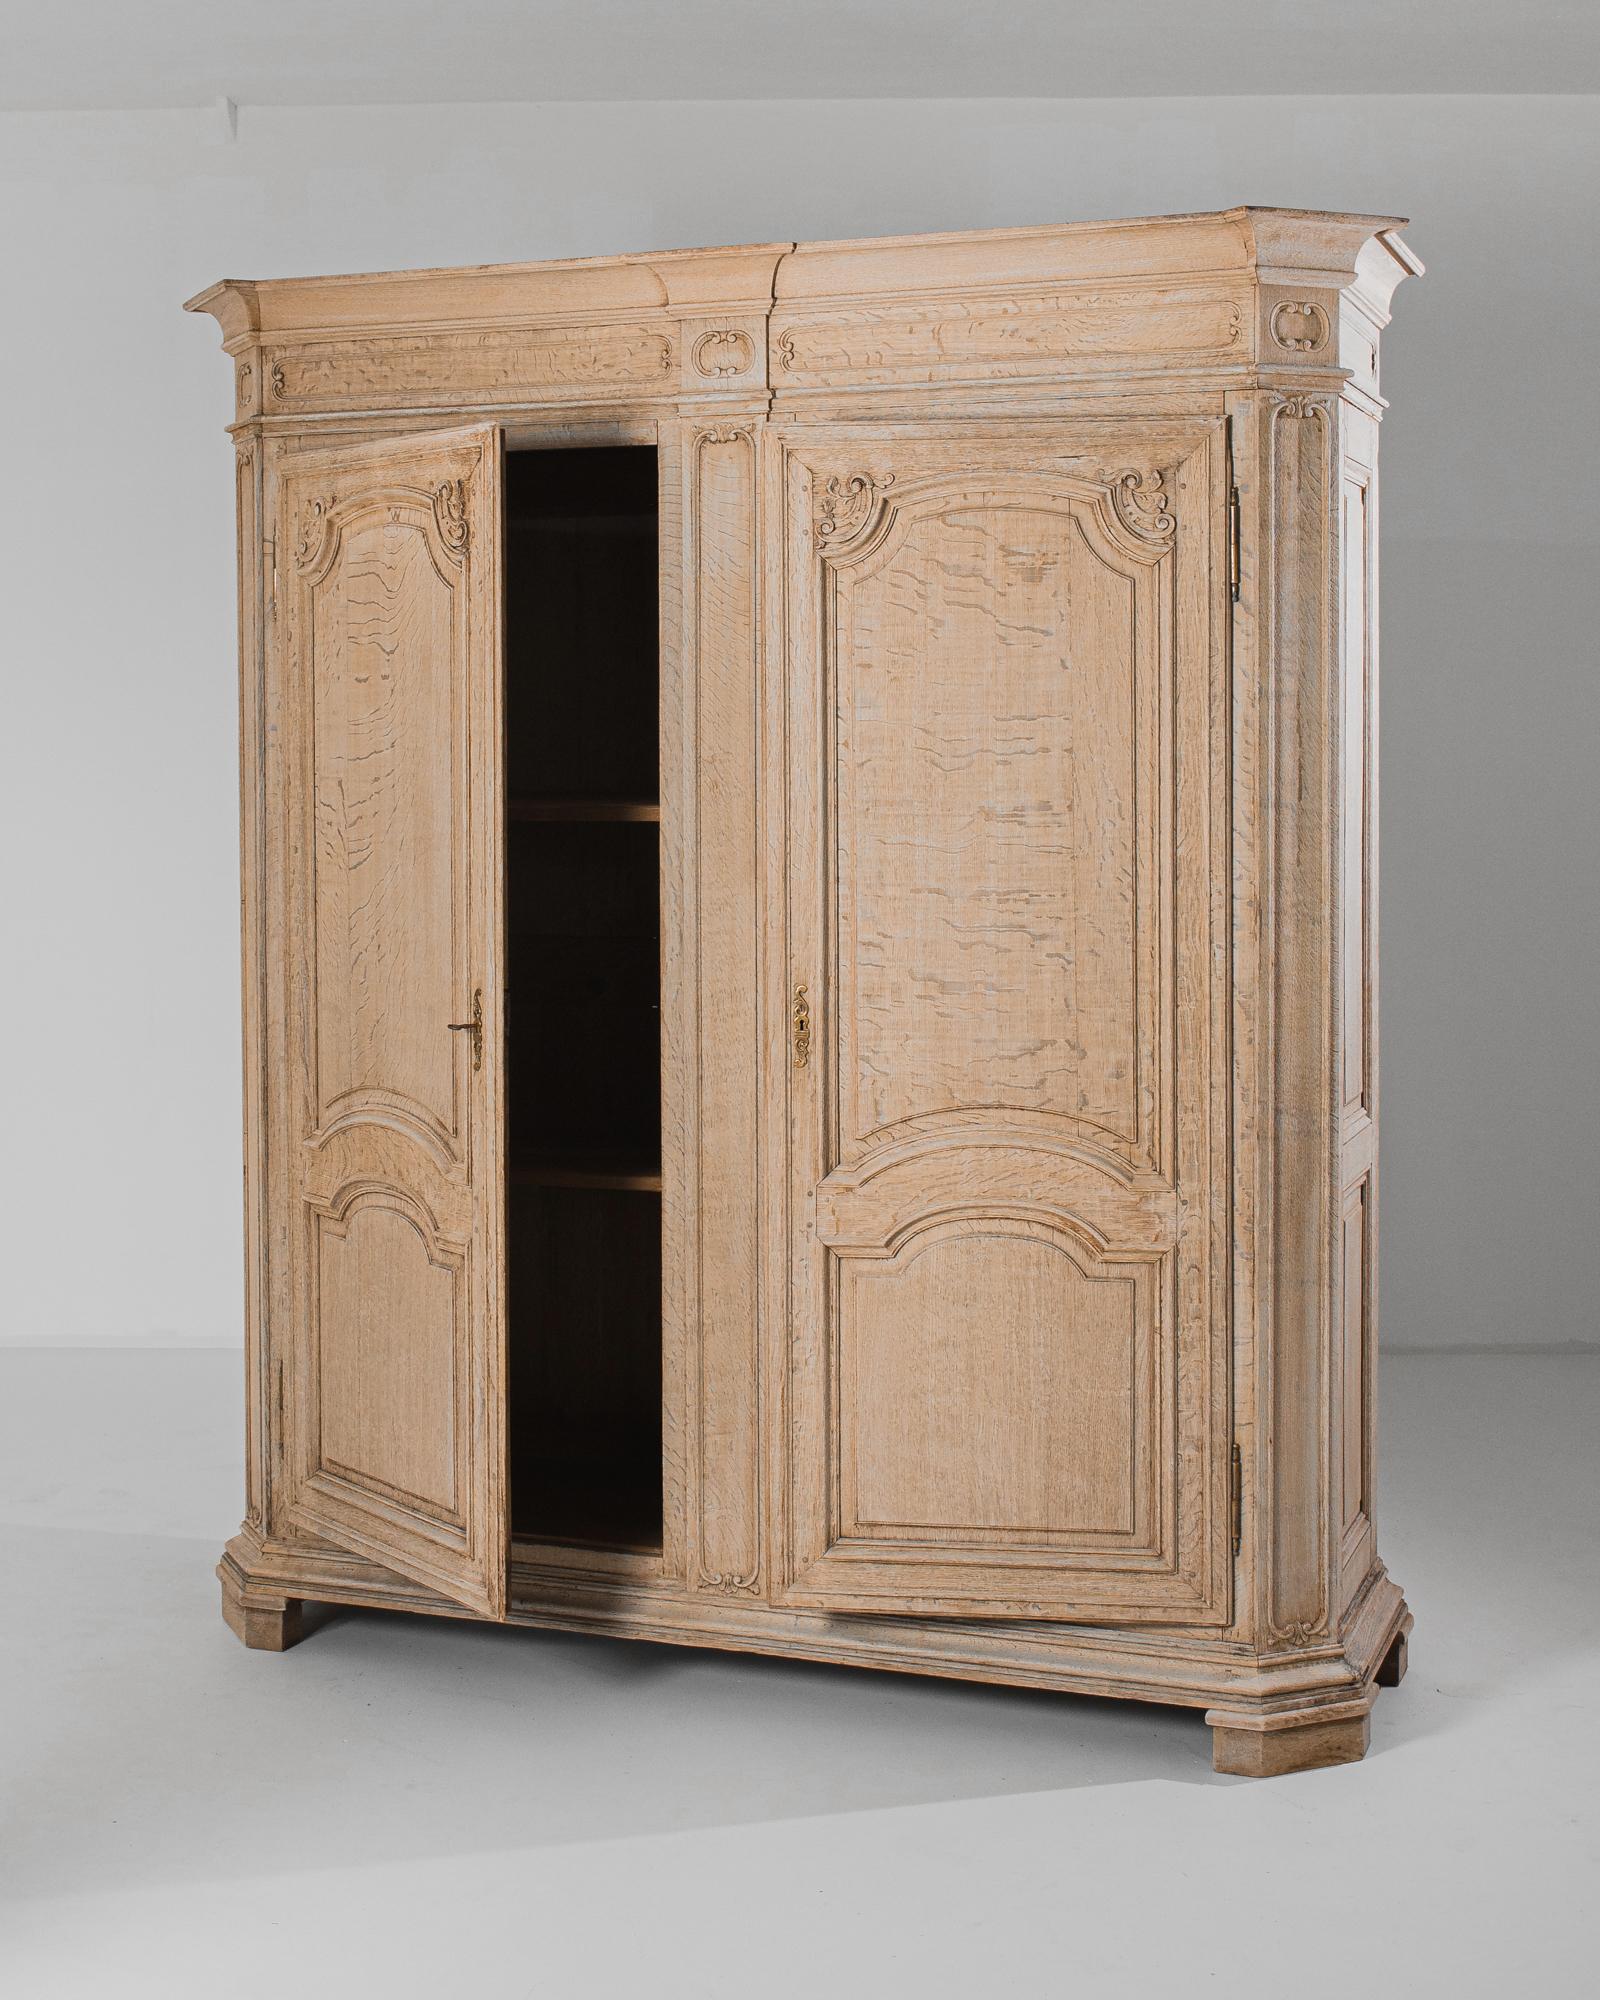 Stepping back into the opulent era of 19th-century France, this bleached oak armoire harks back to a time of grandeur and elegance. Crafted with meticulous attention to detail, this piece exemplifies the exquisite craftsmanship of French furniture